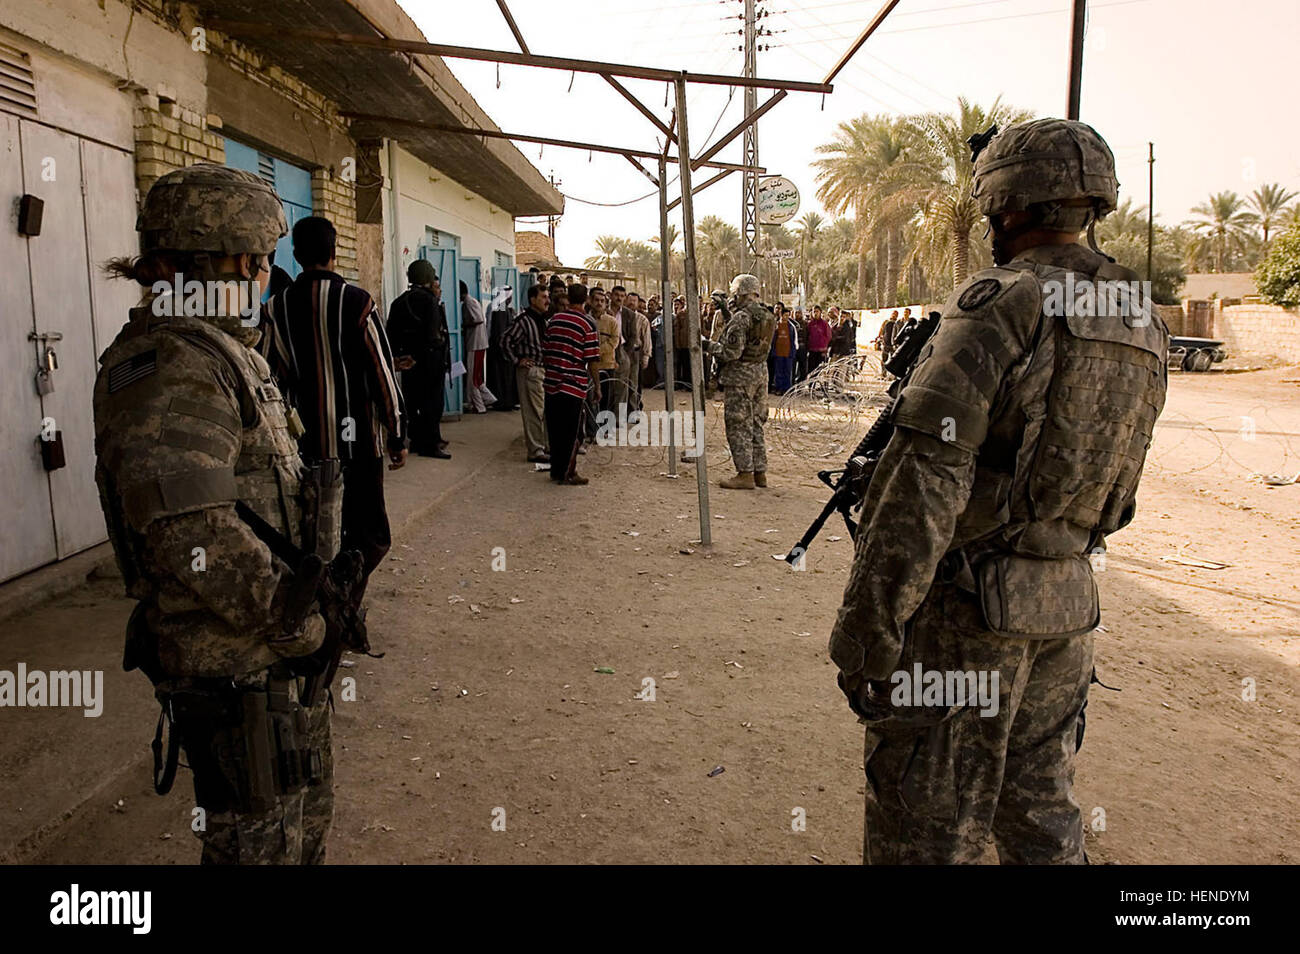 Two Soldiers from the 411th Military Police Company, 716th MP Battalion, 18th MP Brigade, Multi-National Division – Baghdad observe as Sons of Iraq (Abna al Iraq) line up outside a shop in Abayachi March 2. Soldiers from the 411th MP Co. pull security to support the mission of Company B, 1st Battalion, 14th Infantry Regiment, 2nd Stryker Brigade Combat Team, “Warrior,” 25th Infantry Division, MND-B to pay SOI volunteers from the Abayachi area, north of Baghdad. Soldiers support payday activities 79509 Stock Photo